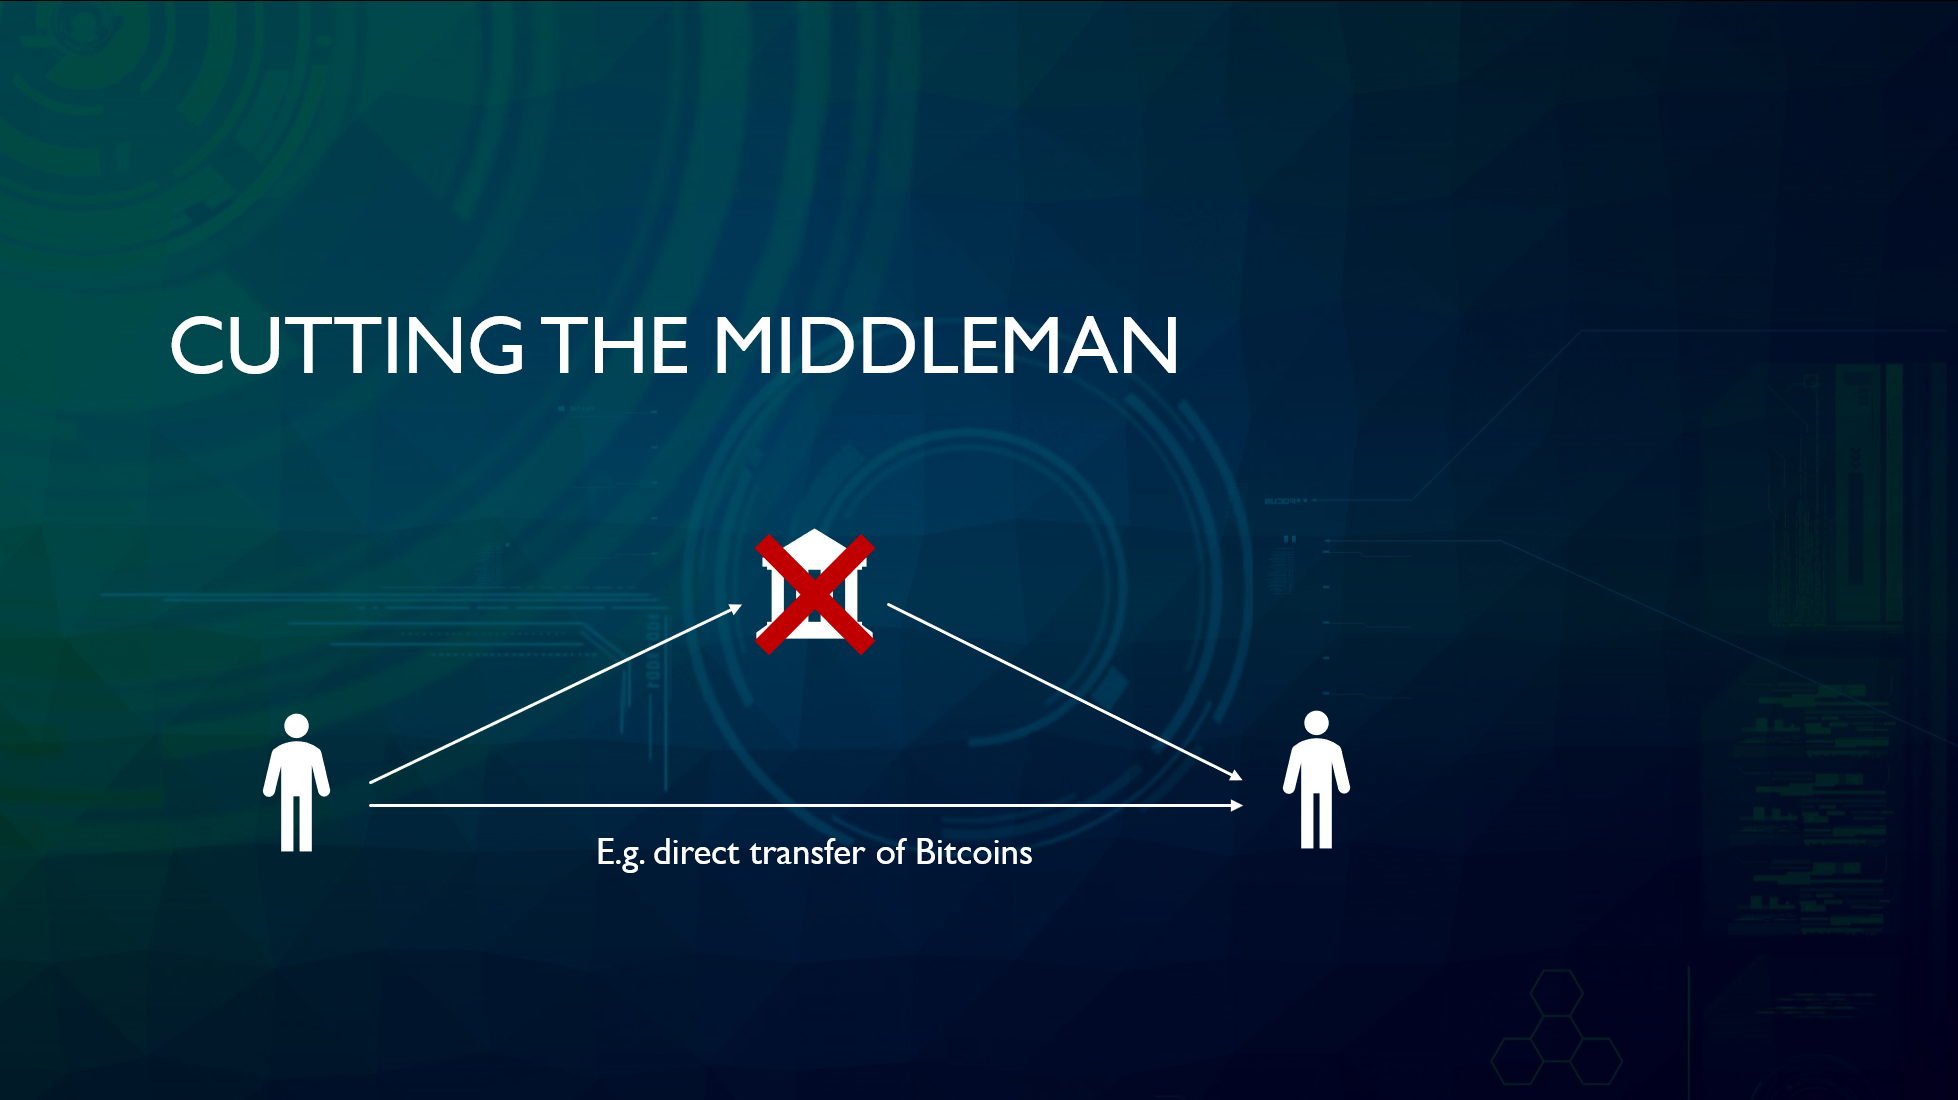 Cutting the Middleman